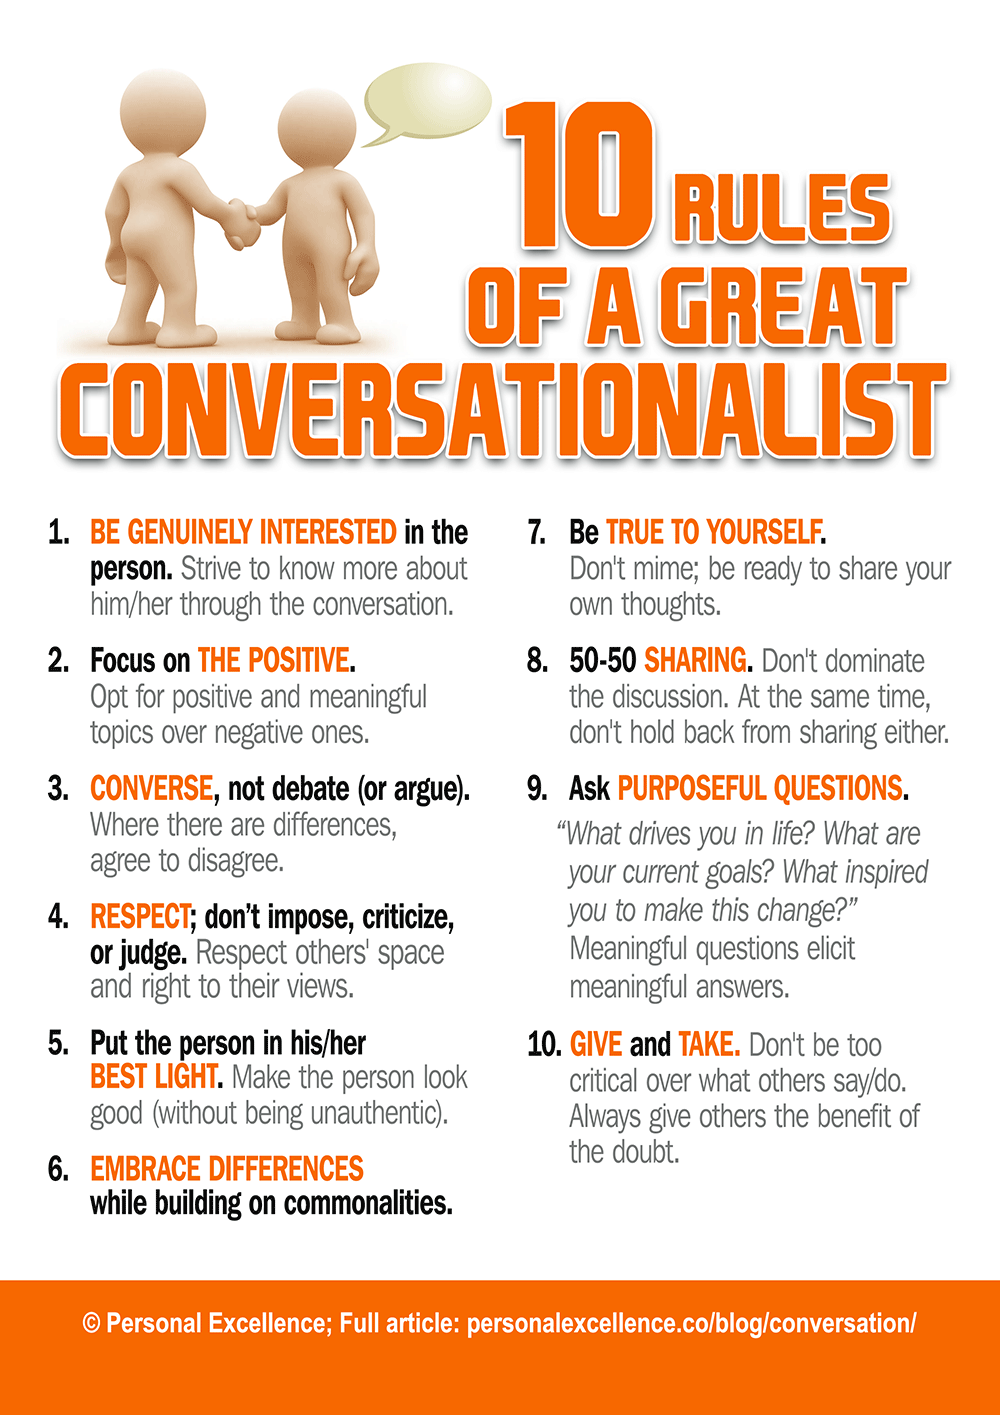 Awesome Info About How To Be Better Conversationalist - Feeloperation